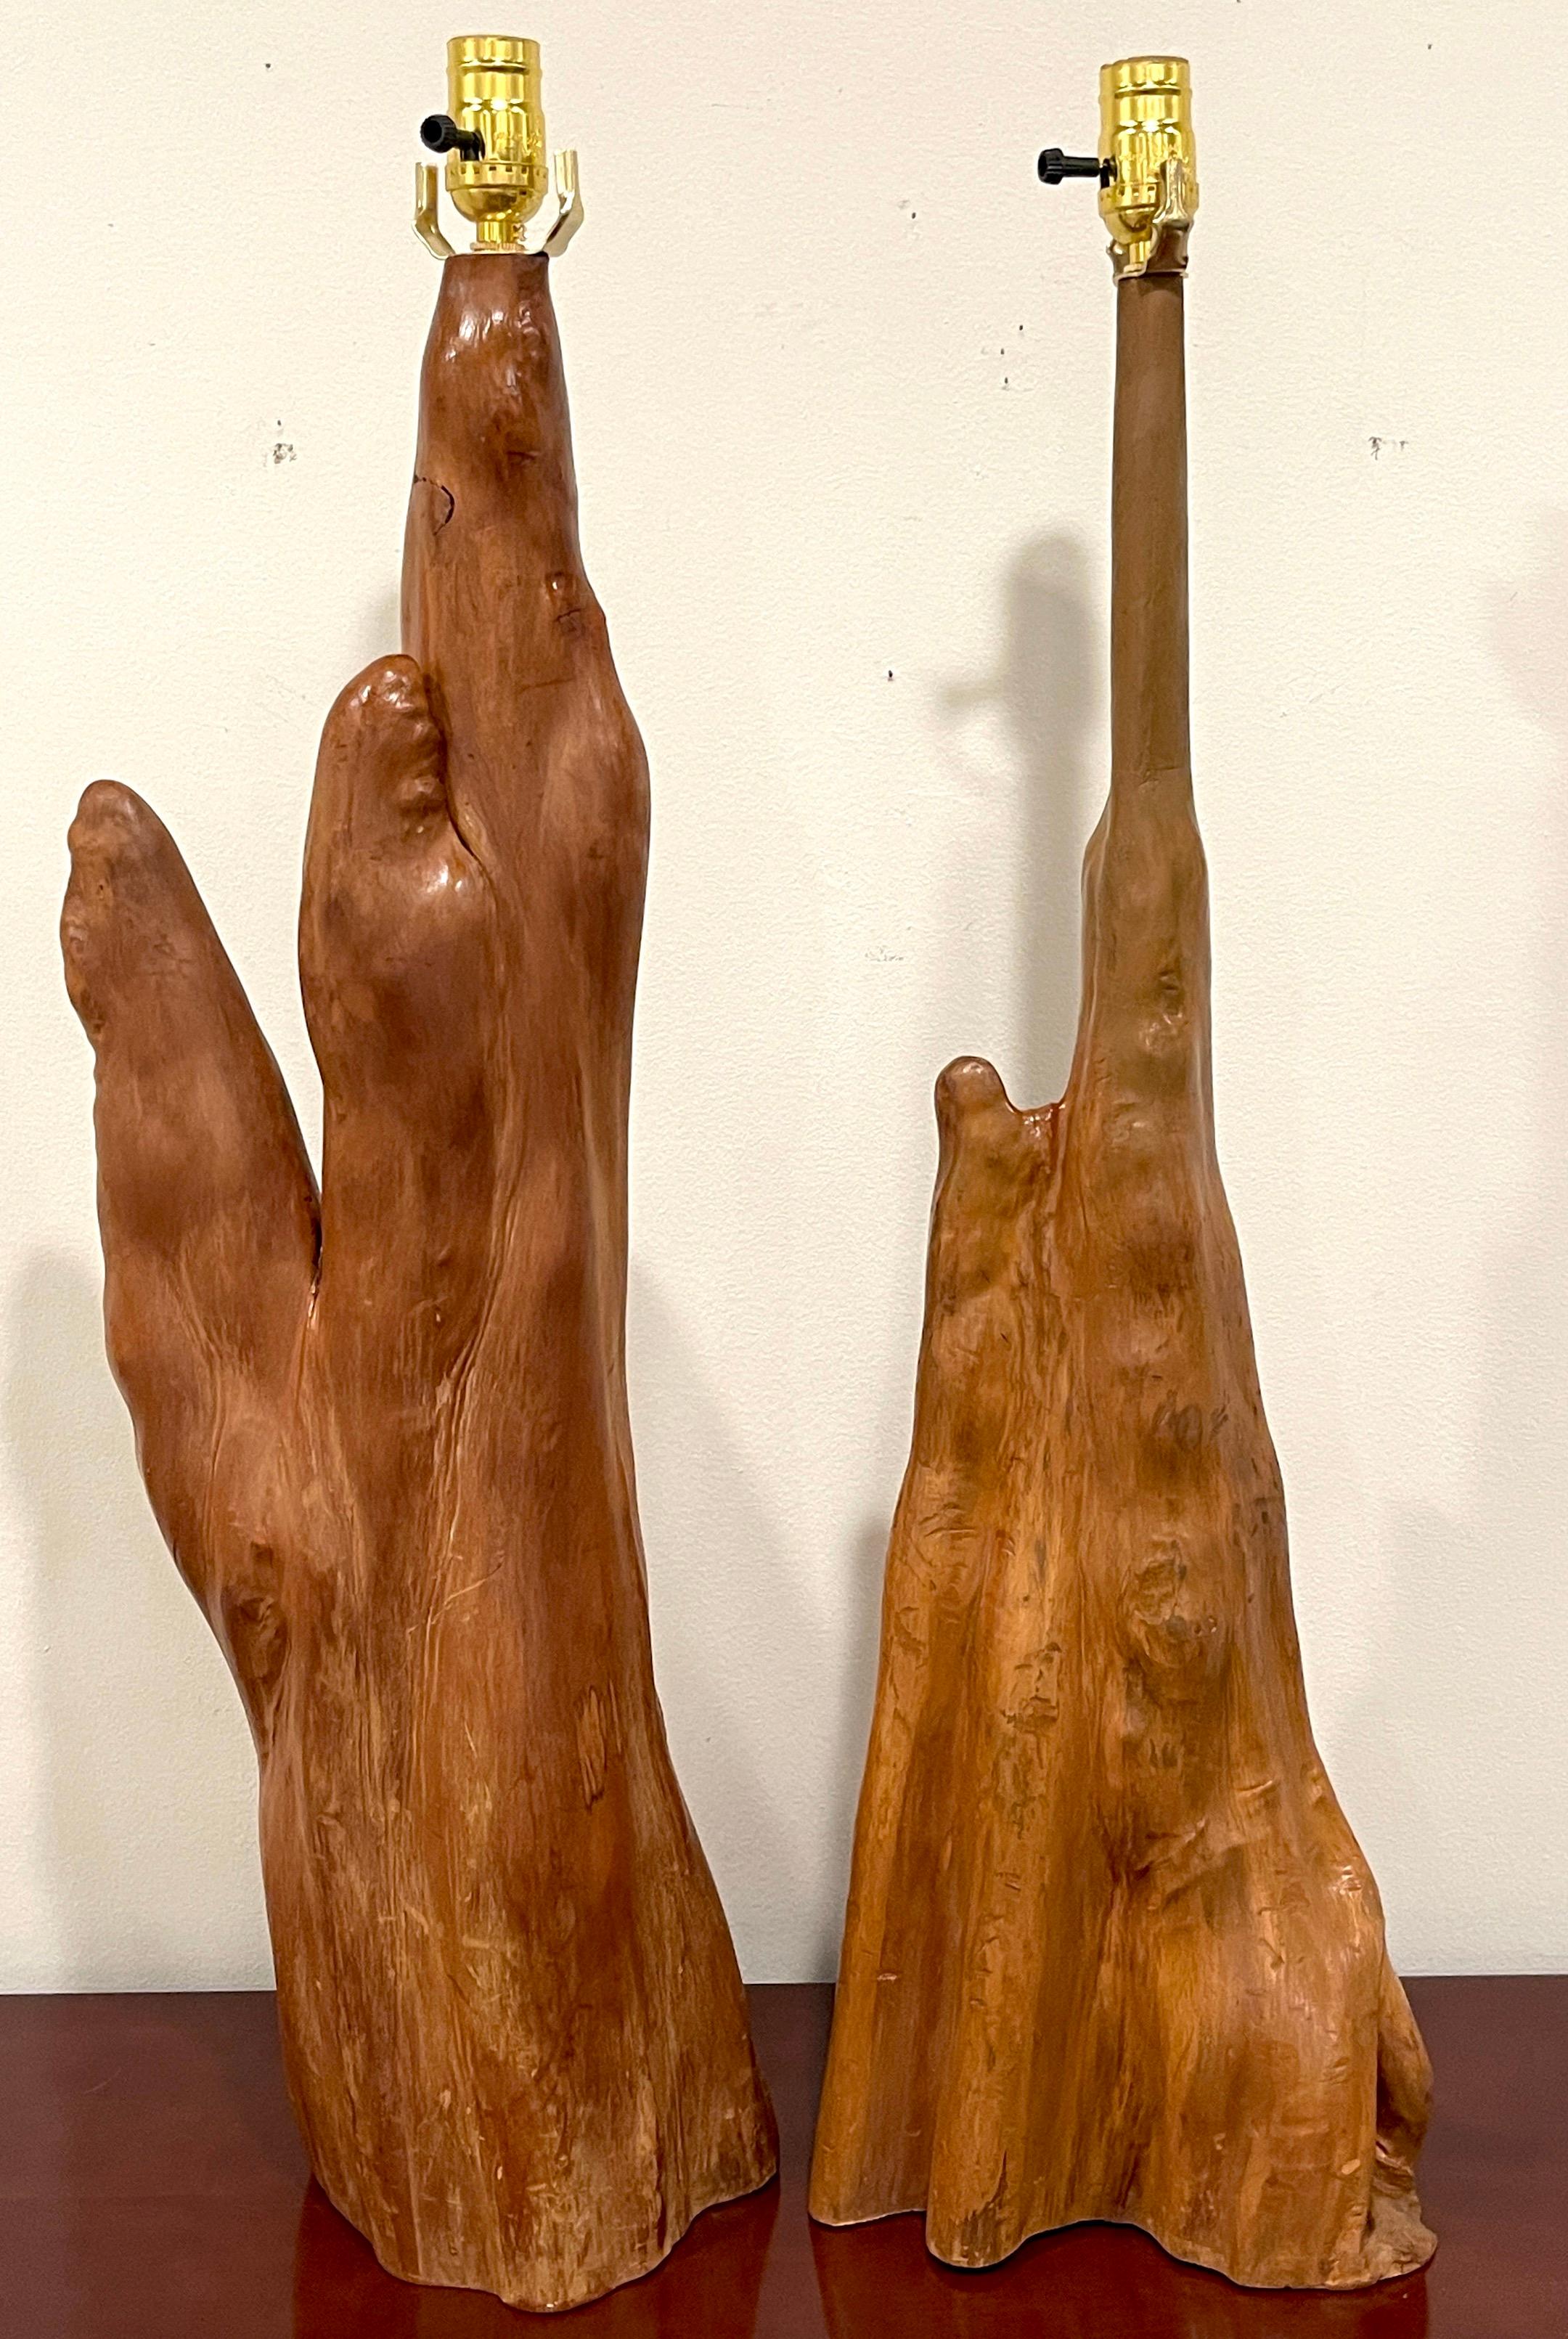 Pair of Mid Century Sculptural Cyprus Root Lamps, Attrib. Cypress Knee Studio
Attributed to the  Cypress Knee Studio, New Orleans, LA 
USA, Circa 1960s

A remarkable pair of sculptural cypress root lamps, attributed to the Cypress Knee Studio in New